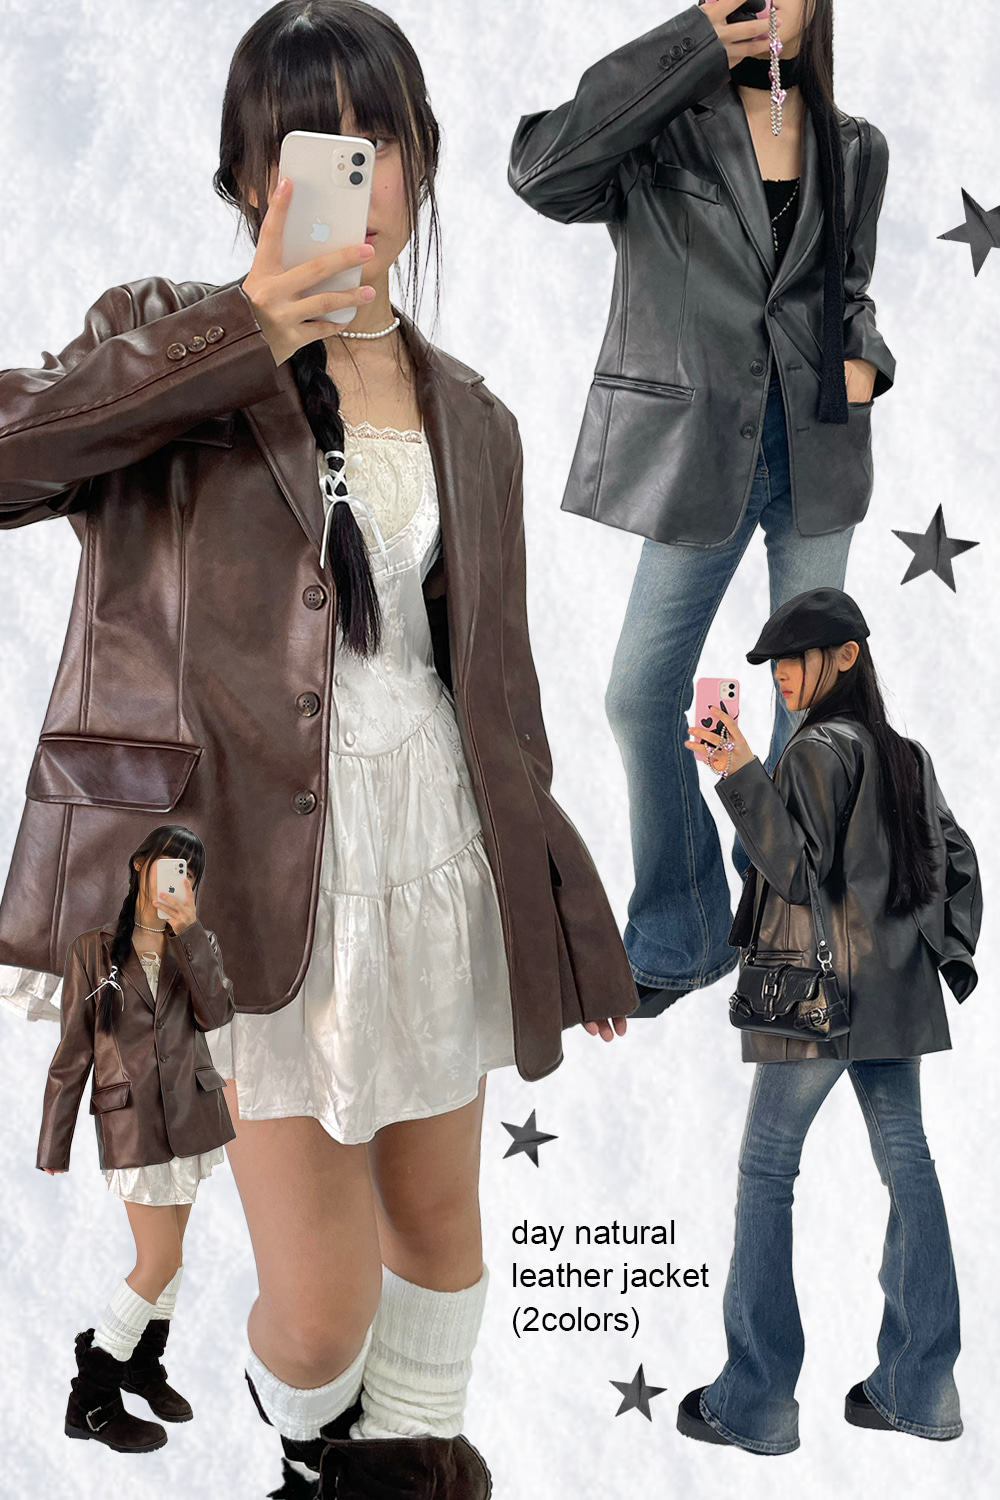 day natural leather jacket (2colors)